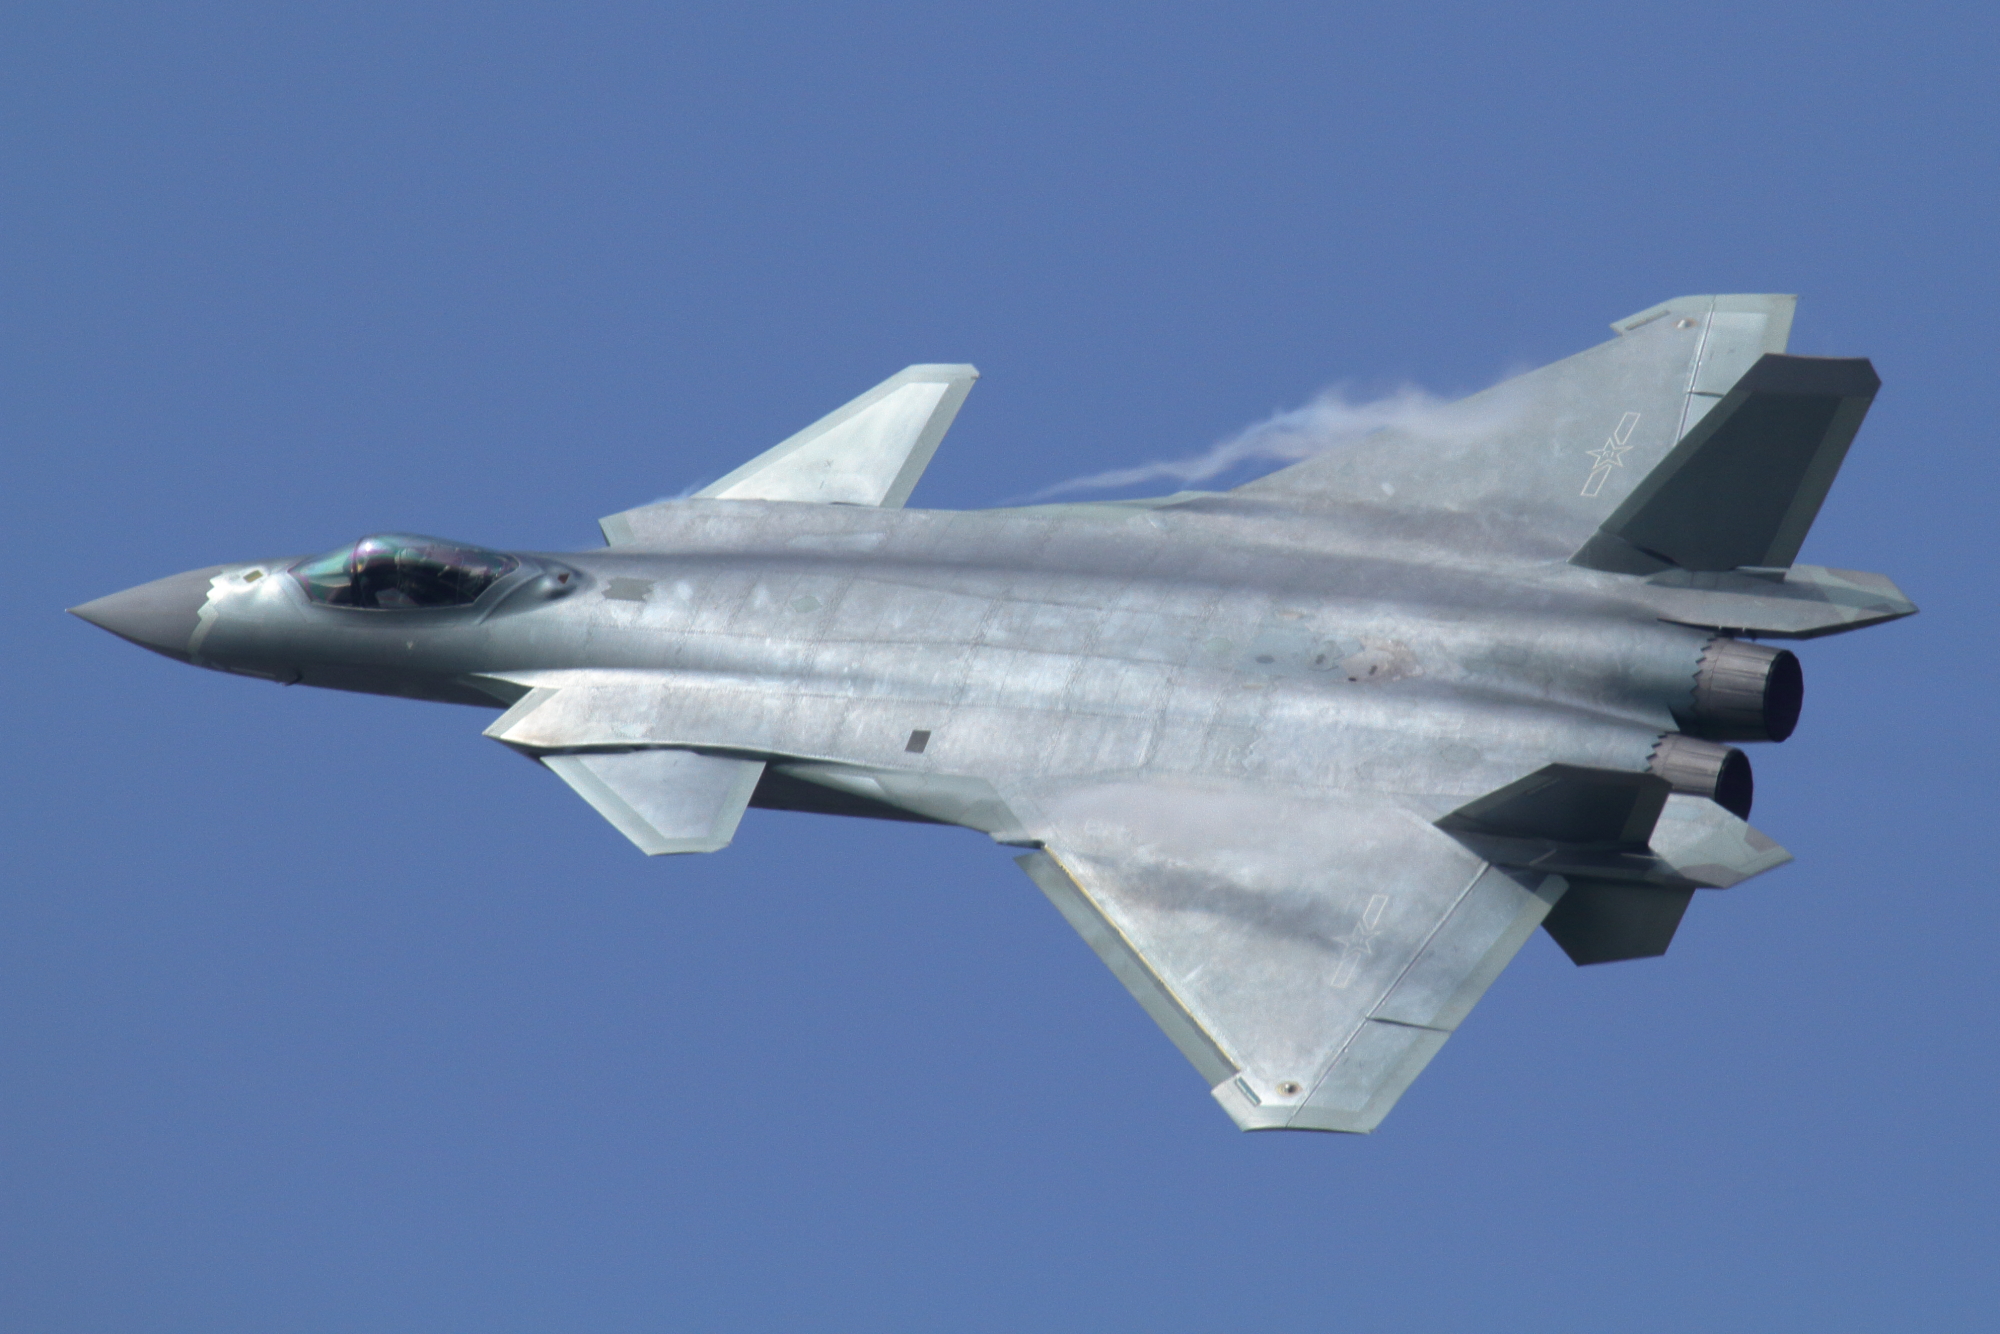 To Conventional Combat Jets Like J-11 & J-15 Fighters?